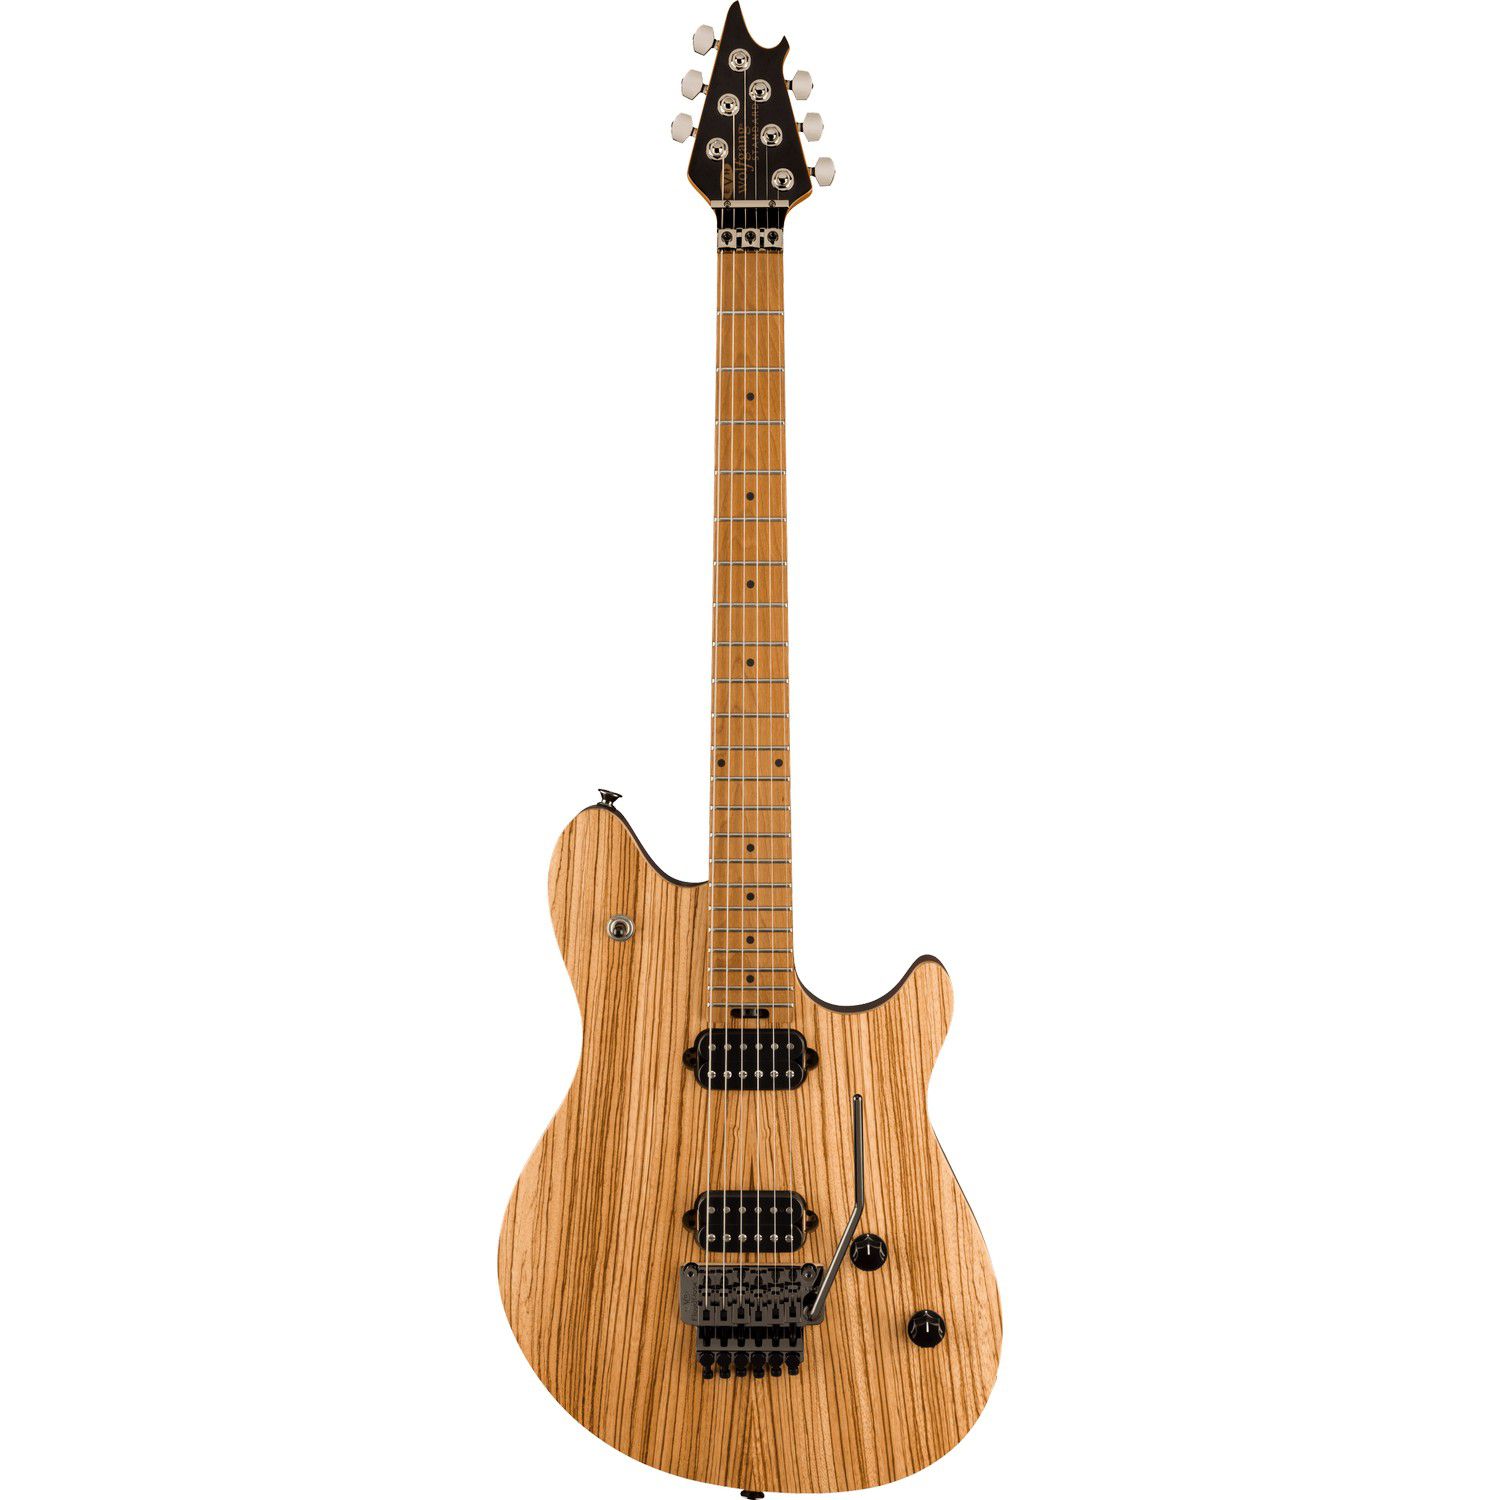 An image of Evh Wolfgang Standard Exotic Baked Maple Fb Zebrawood Electric Guitar | PMT Onli...